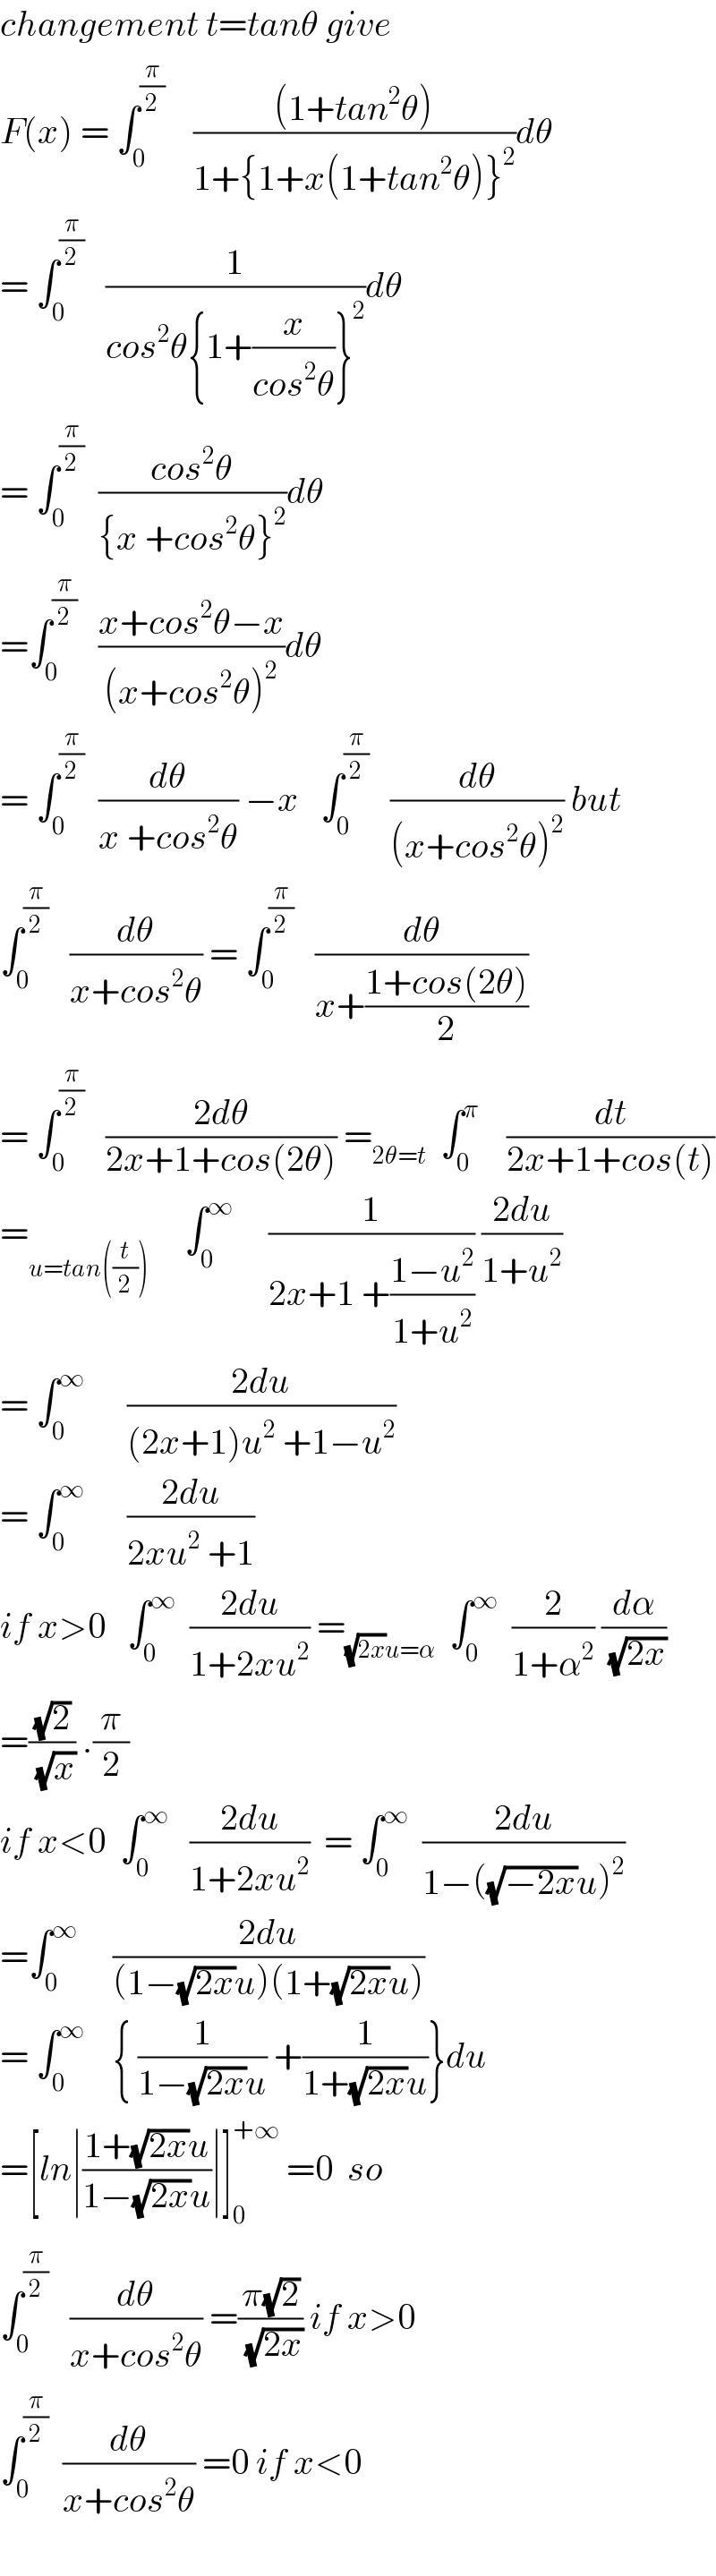 changement t=tanθ give  F(x) = ∫_0 ^(π/2)     (((1+tan^2 θ))/(1+{1+x(1+tan^2 θ)}^2 ))dθ  = ∫_0 ^(π/2)    (1/(cos^2 θ{1+(x/(cos^2 θ))}^2 ))dθ  = ∫_0 ^(π/2)   ((cos^2 θ)/({x +cos^2 θ}^2 ))dθ  =∫_0 ^(π/2)    ((x+cos^2 θ−x)/((x+cos^2 θ)^2 ))dθ  = ∫_0 ^(π/2)   (dθ/(x +cos^2 θ)) −x   ∫_0 ^(π/2)    (dθ/((x+cos^2 θ)^2 )) but  ∫_0 ^(π/2)    (dθ/(x+cos^2 θ)) = ∫_0 ^(π/2)    (dθ/(x+((1+cos(2θ))/2)))  = ∫_0 ^(π/2)    ((2dθ)/(2x+1+cos(2θ))) =_(2θ=t)   ∫_0 ^π     (dt/(2x+1+cos(t)))  =_(u=tan((t/2)))      ∫_0 ^∞      (1/(2x+1 +((1−u^2 )/(1+u^2 )))) ((2du)/(1+u^2 ))  = ∫_0 ^∞       ((2du)/((2x+1)u^2  +1−u^2 ))  = ∫_0 ^∞       ((2du)/(2xu^2  +1))  if x>0   ∫_0 ^∞   ((2du)/(1+2xu^2 )) =_((√(2x))u=α)   ∫_0 ^∞   (2/(1+α^2 )) (dα/(√(2x)))  =((√2)/(√x)) .(π/2)  if x<0  ∫_0 ^∞    ((2du)/(1+2xu^2 ))  = ∫_0 ^∞   ((2du)/(1−((√(−2x))u)^2 ))  =∫_0 ^∞      ((2du)/((1−(√(2x))u)(1+(√(2x))u)))  = ∫_0 ^∞     { (1/(1−(√(2x))u)) +(1/(1+(√(2x))u))}du  =[ln∣((1+(√(2x))u)/(1−(√(2x))u))∣]_0 ^(+∞)  =0  so  ∫_0 ^(π/2)    (dθ/(x+cos^2 θ)) =((π(√2))/(√(2x))) if x>0  ∫_0 ^(π/2)   (dθ/(x+cos^2 θ)) =0 if x<0    